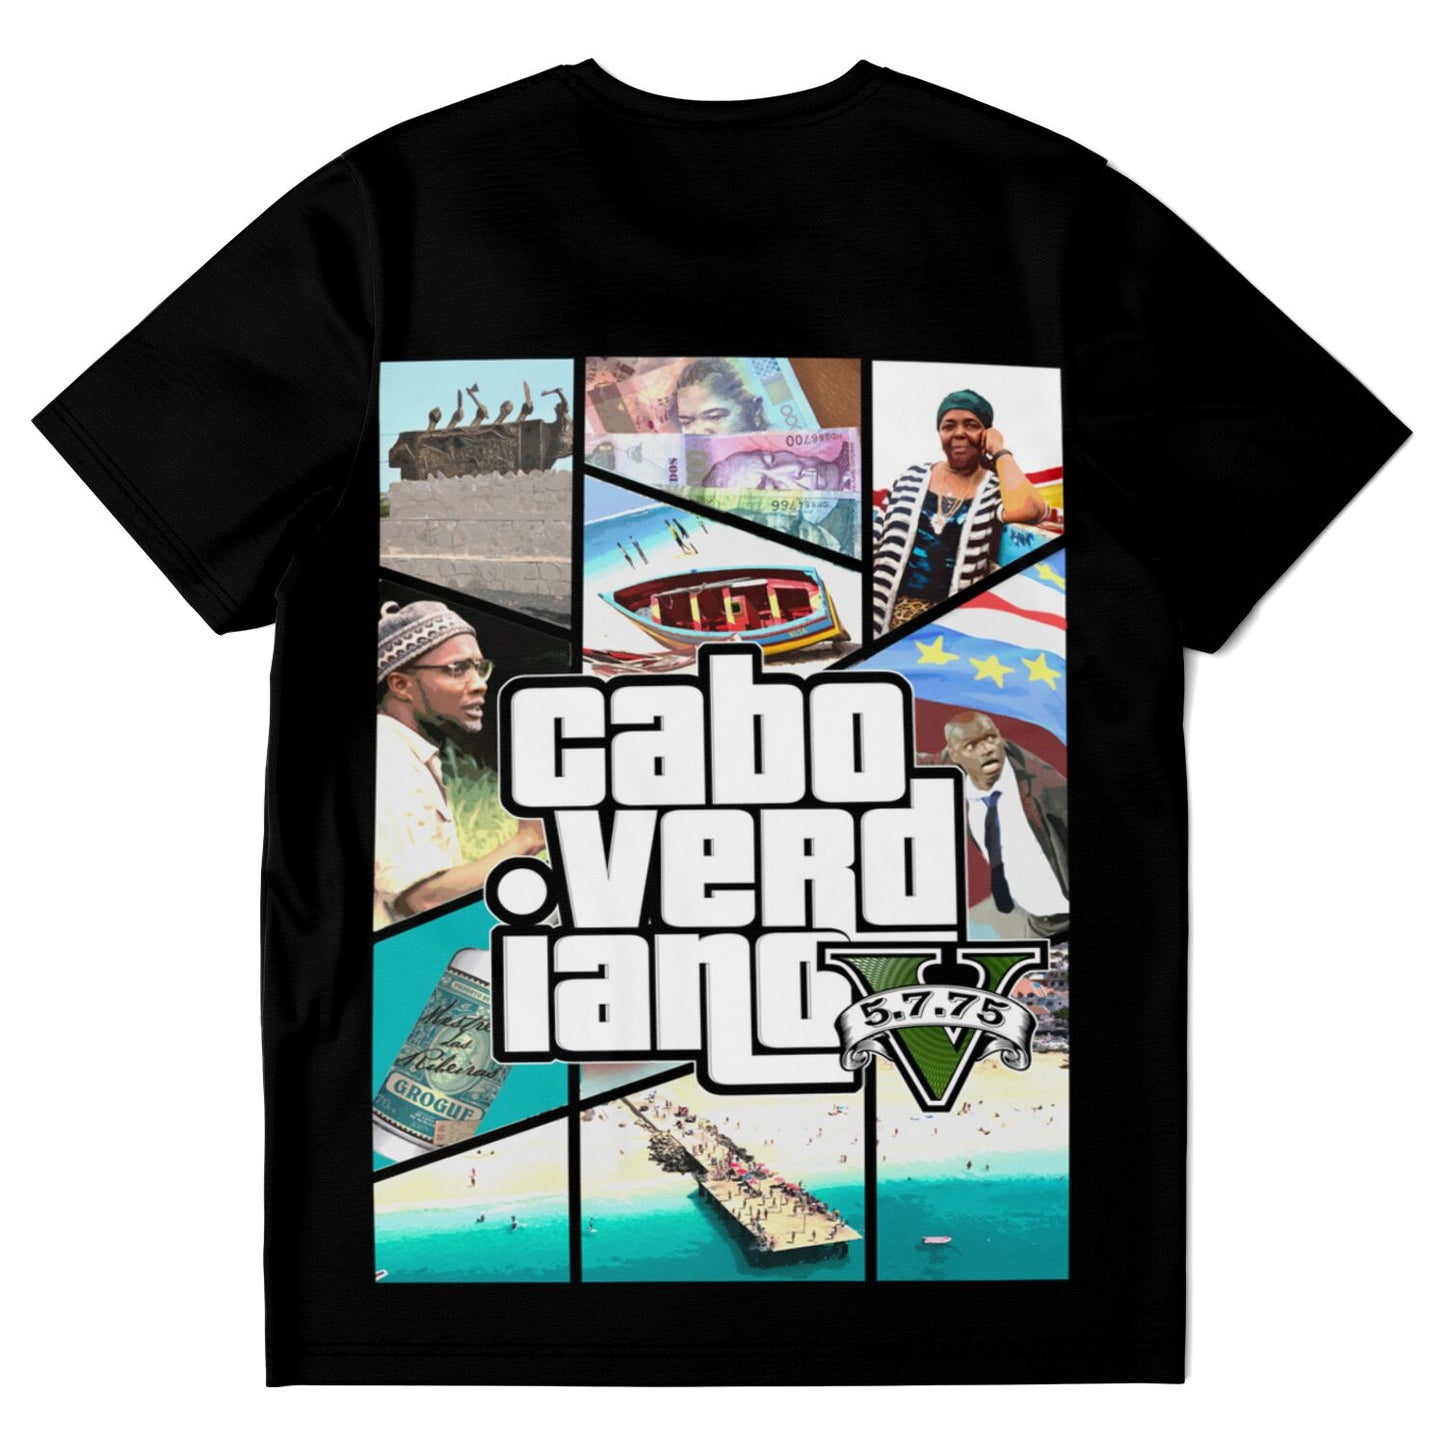 CABOVERDIANO T-shirt